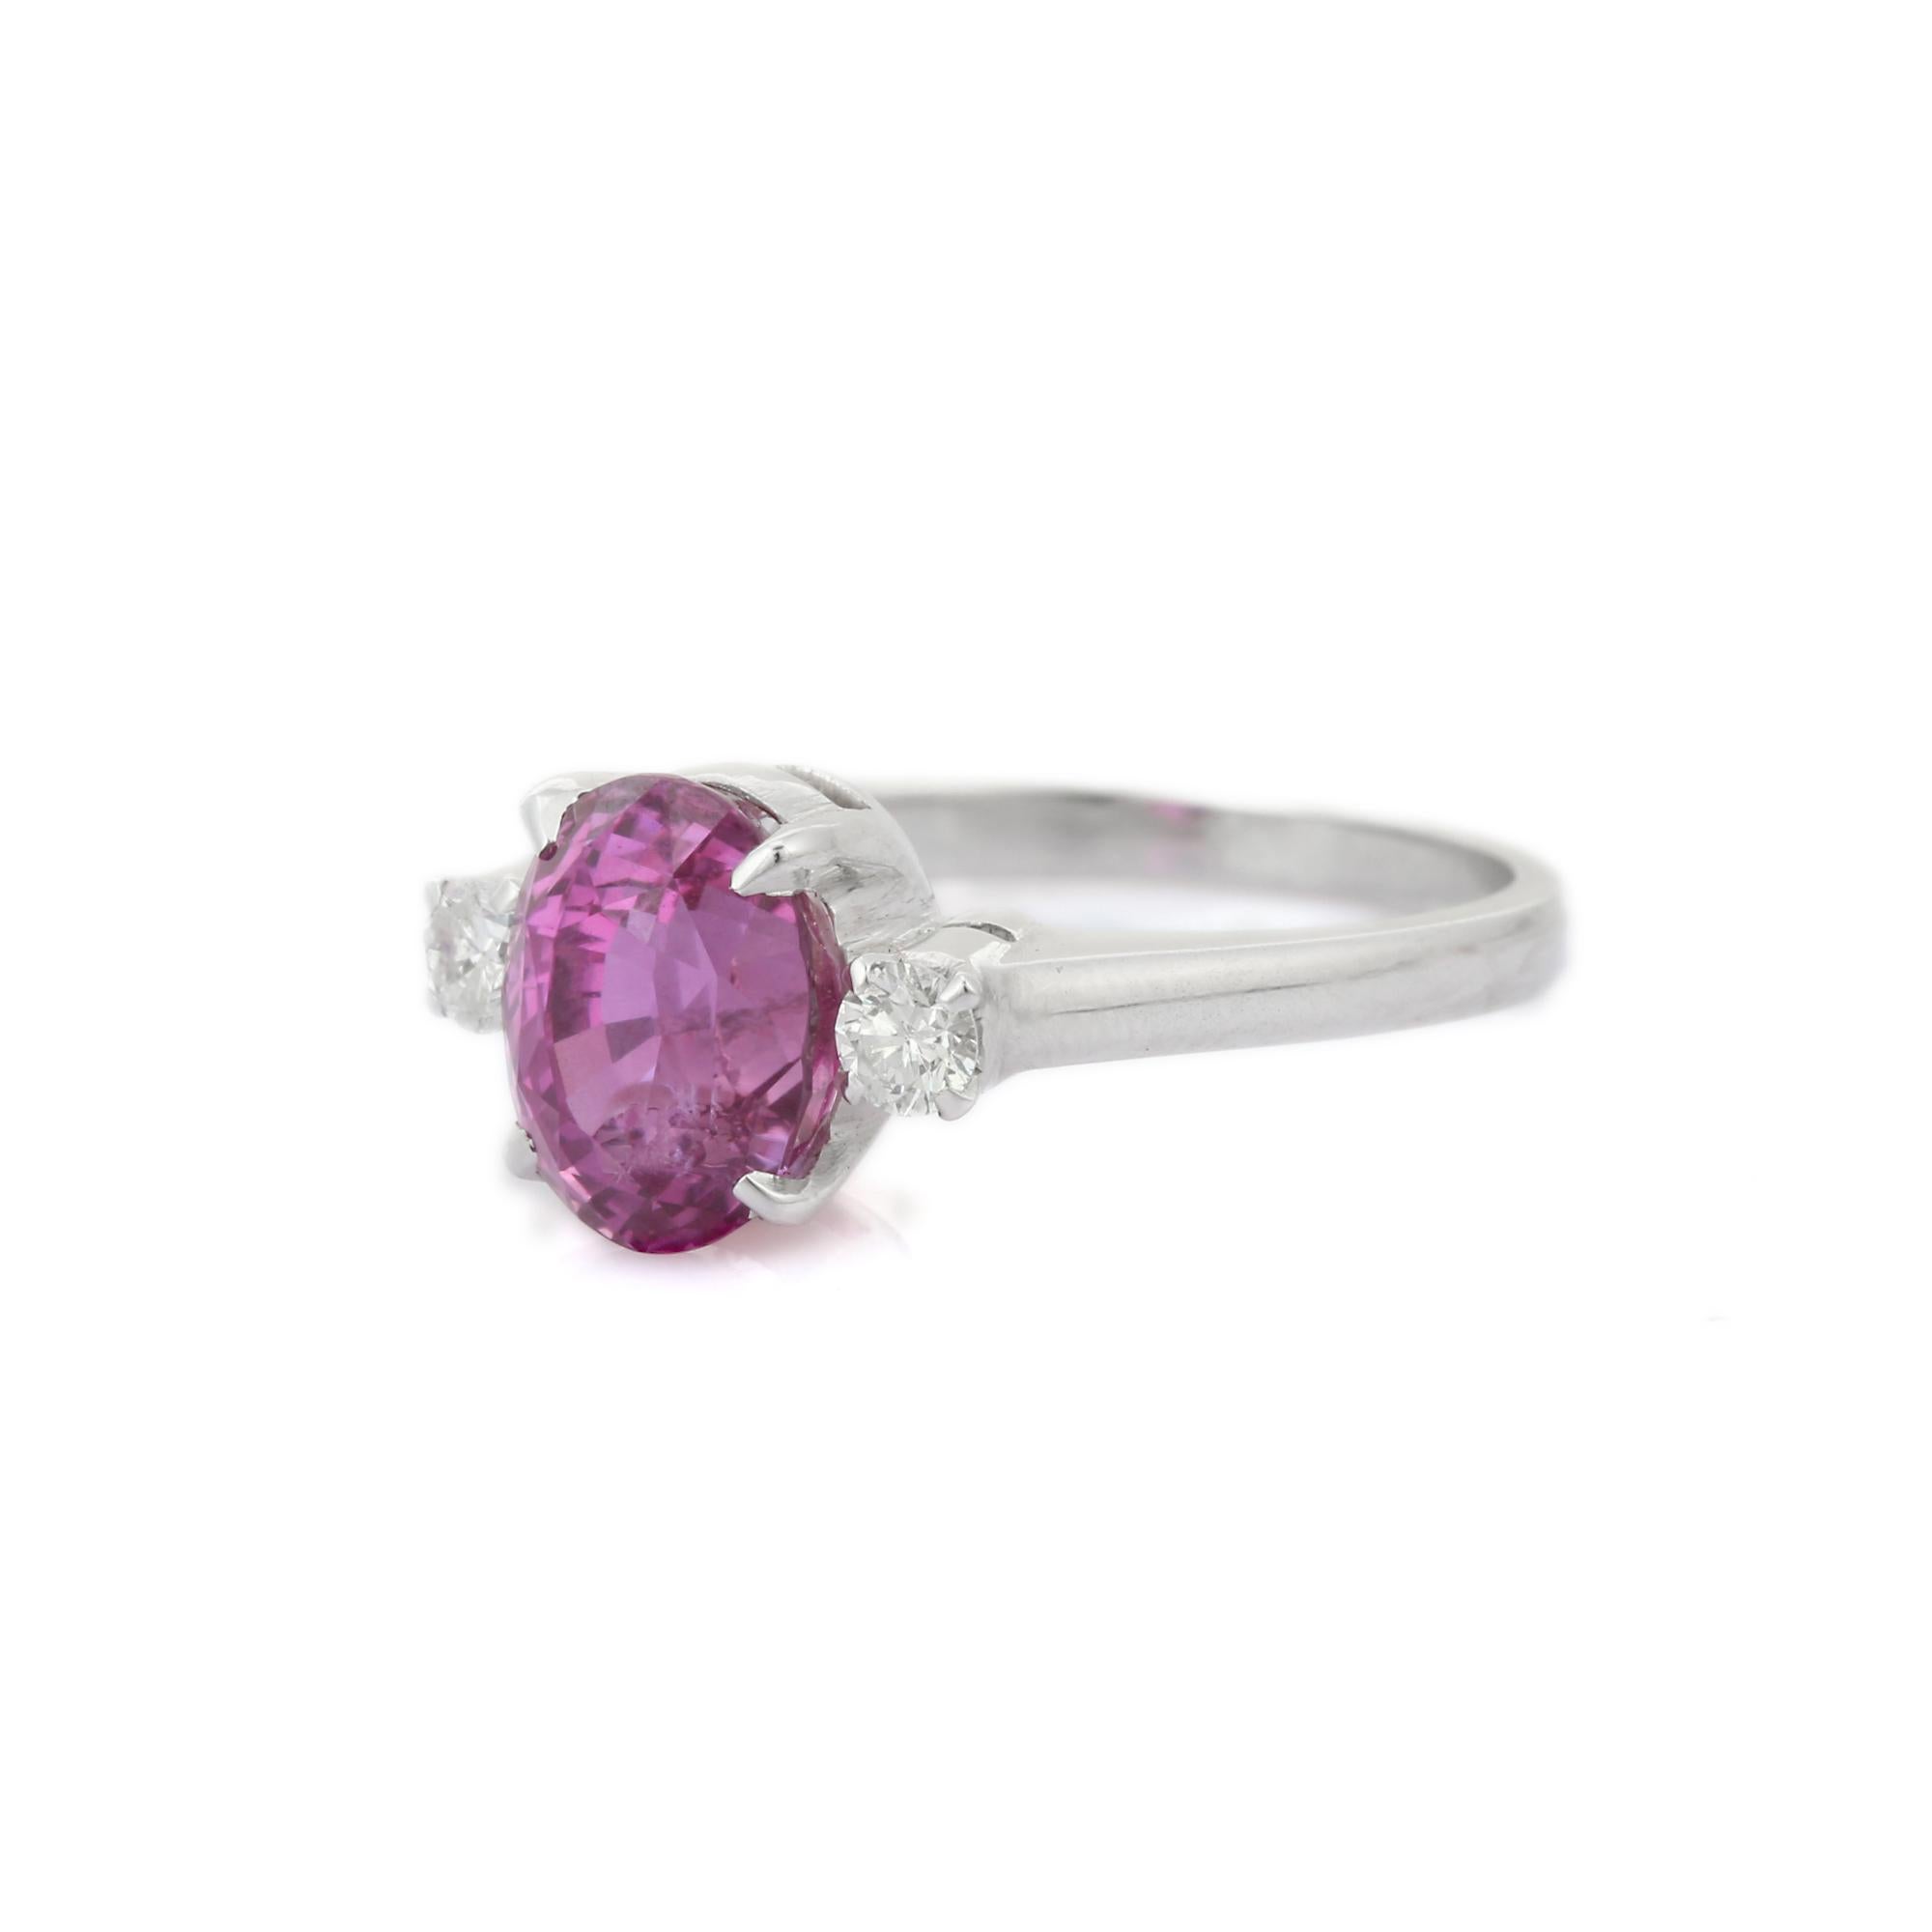 For Sale:  3.66 Carat Three Stone Pink Sapphire and Diamond Ring in 18K White Gold 5